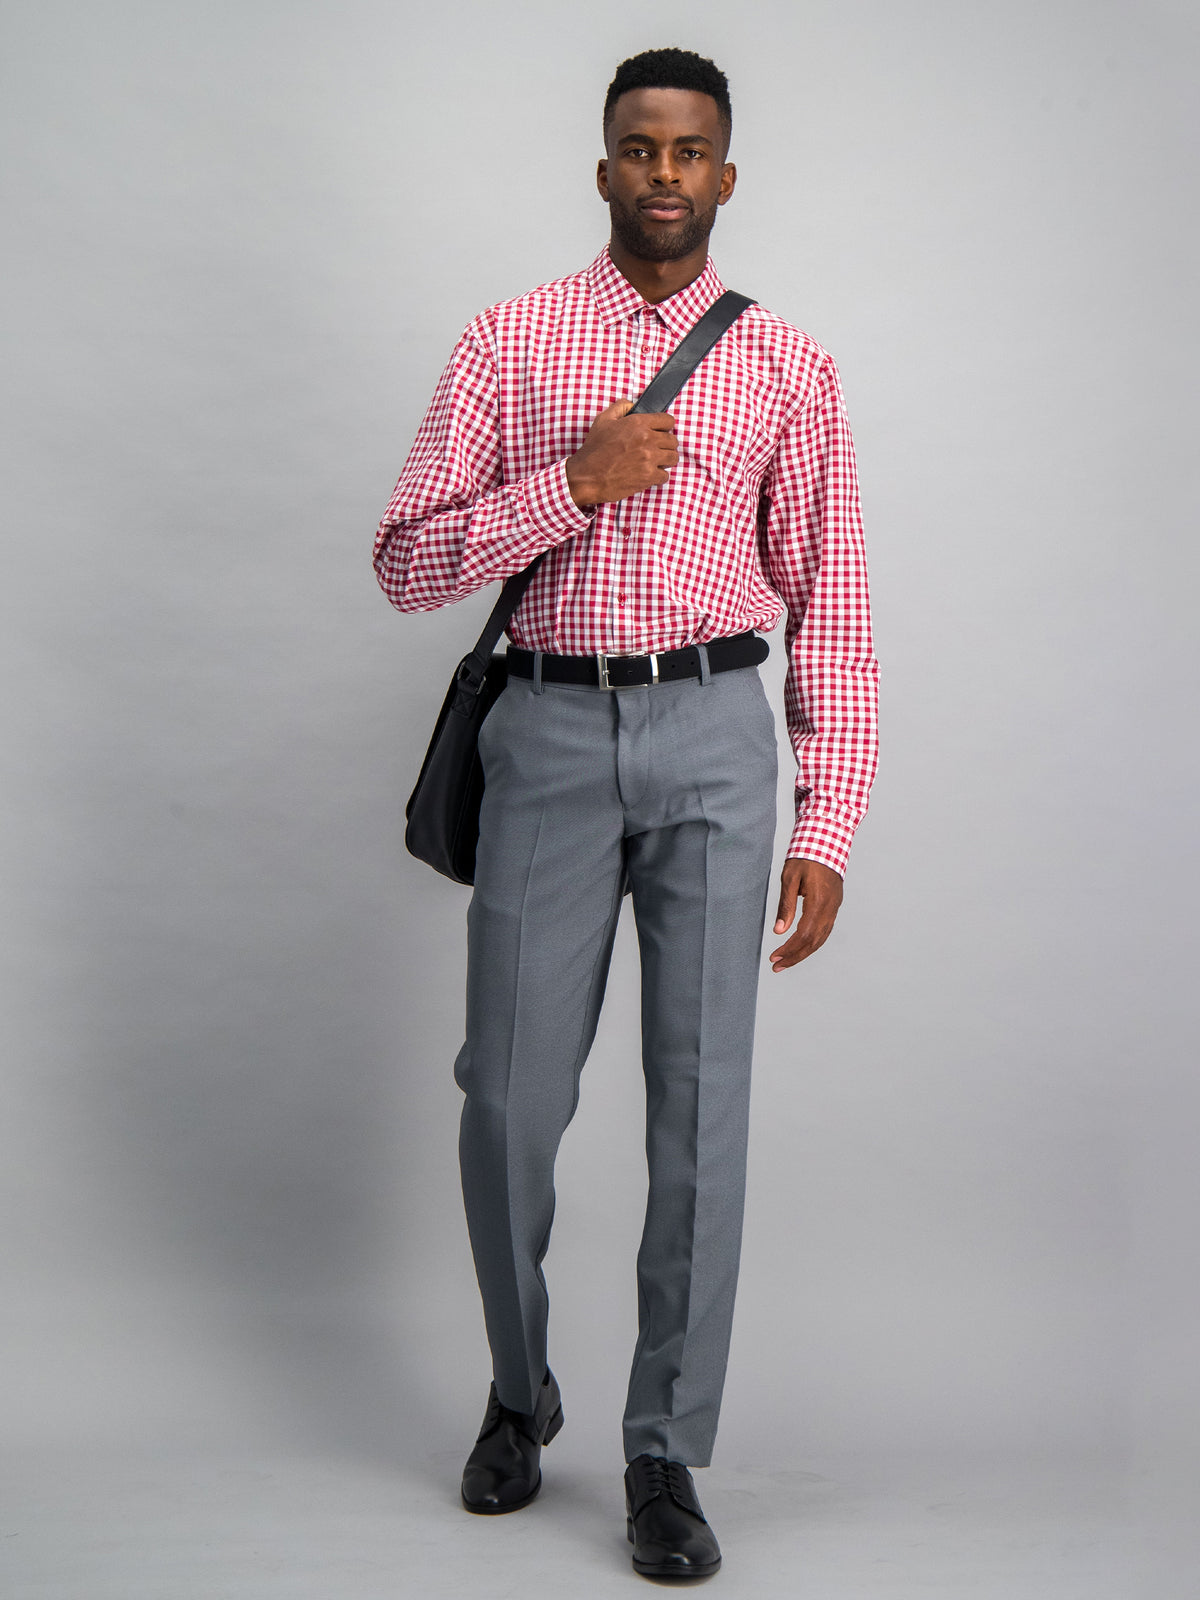 Dean slim fit cotton shirt- red gingham